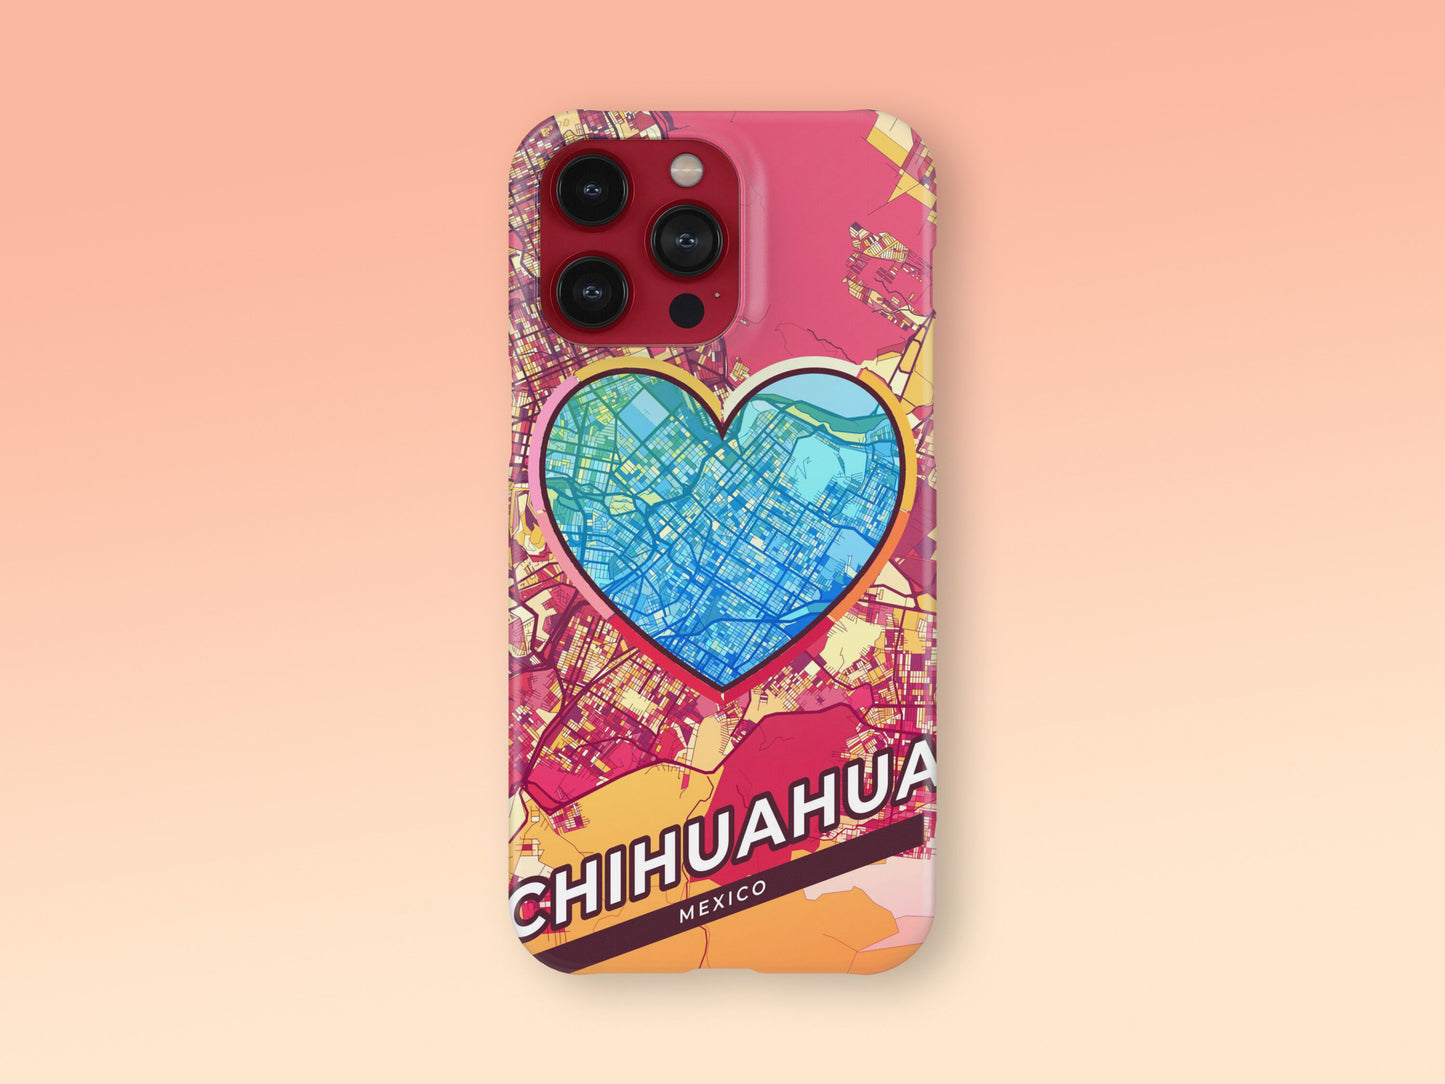 Chihuahua Mexico slim phone case with colorful icon. Birthday, wedding or housewarming gift. Couple match cases. 2